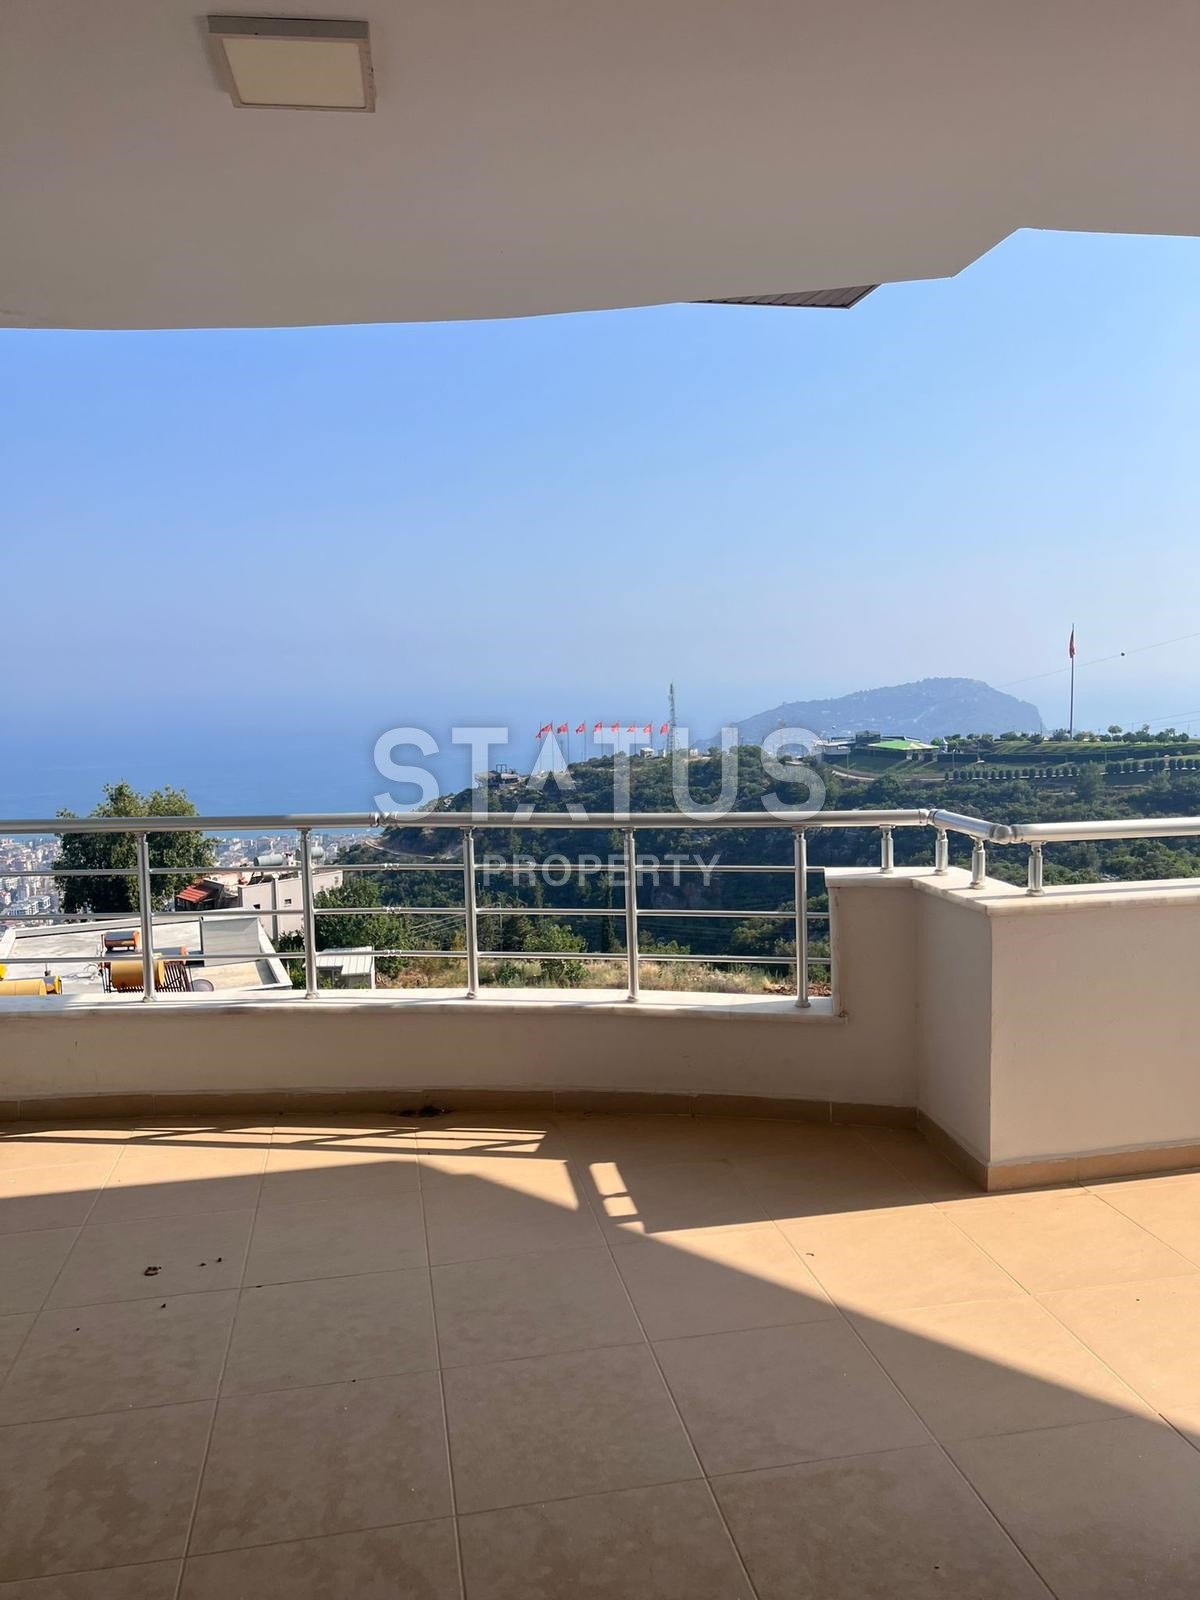 Villa 3+1 in a complex of villas with stunning views, 150m2 фото 2